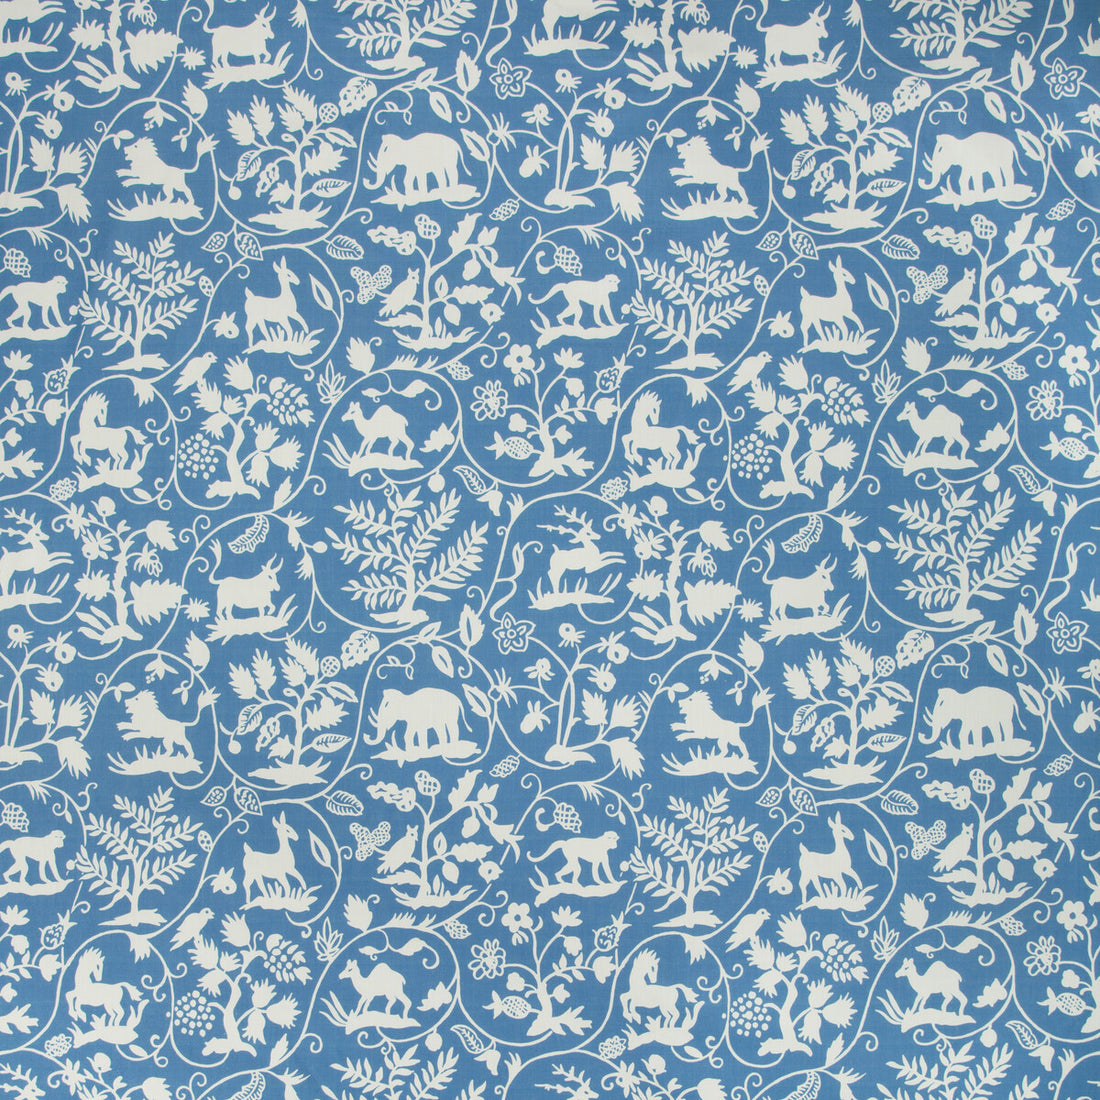 Animaltale fabric in larkspur color - pattern ANIMALTALE.15.0 - by Kravet Basics in the Bermuda collection